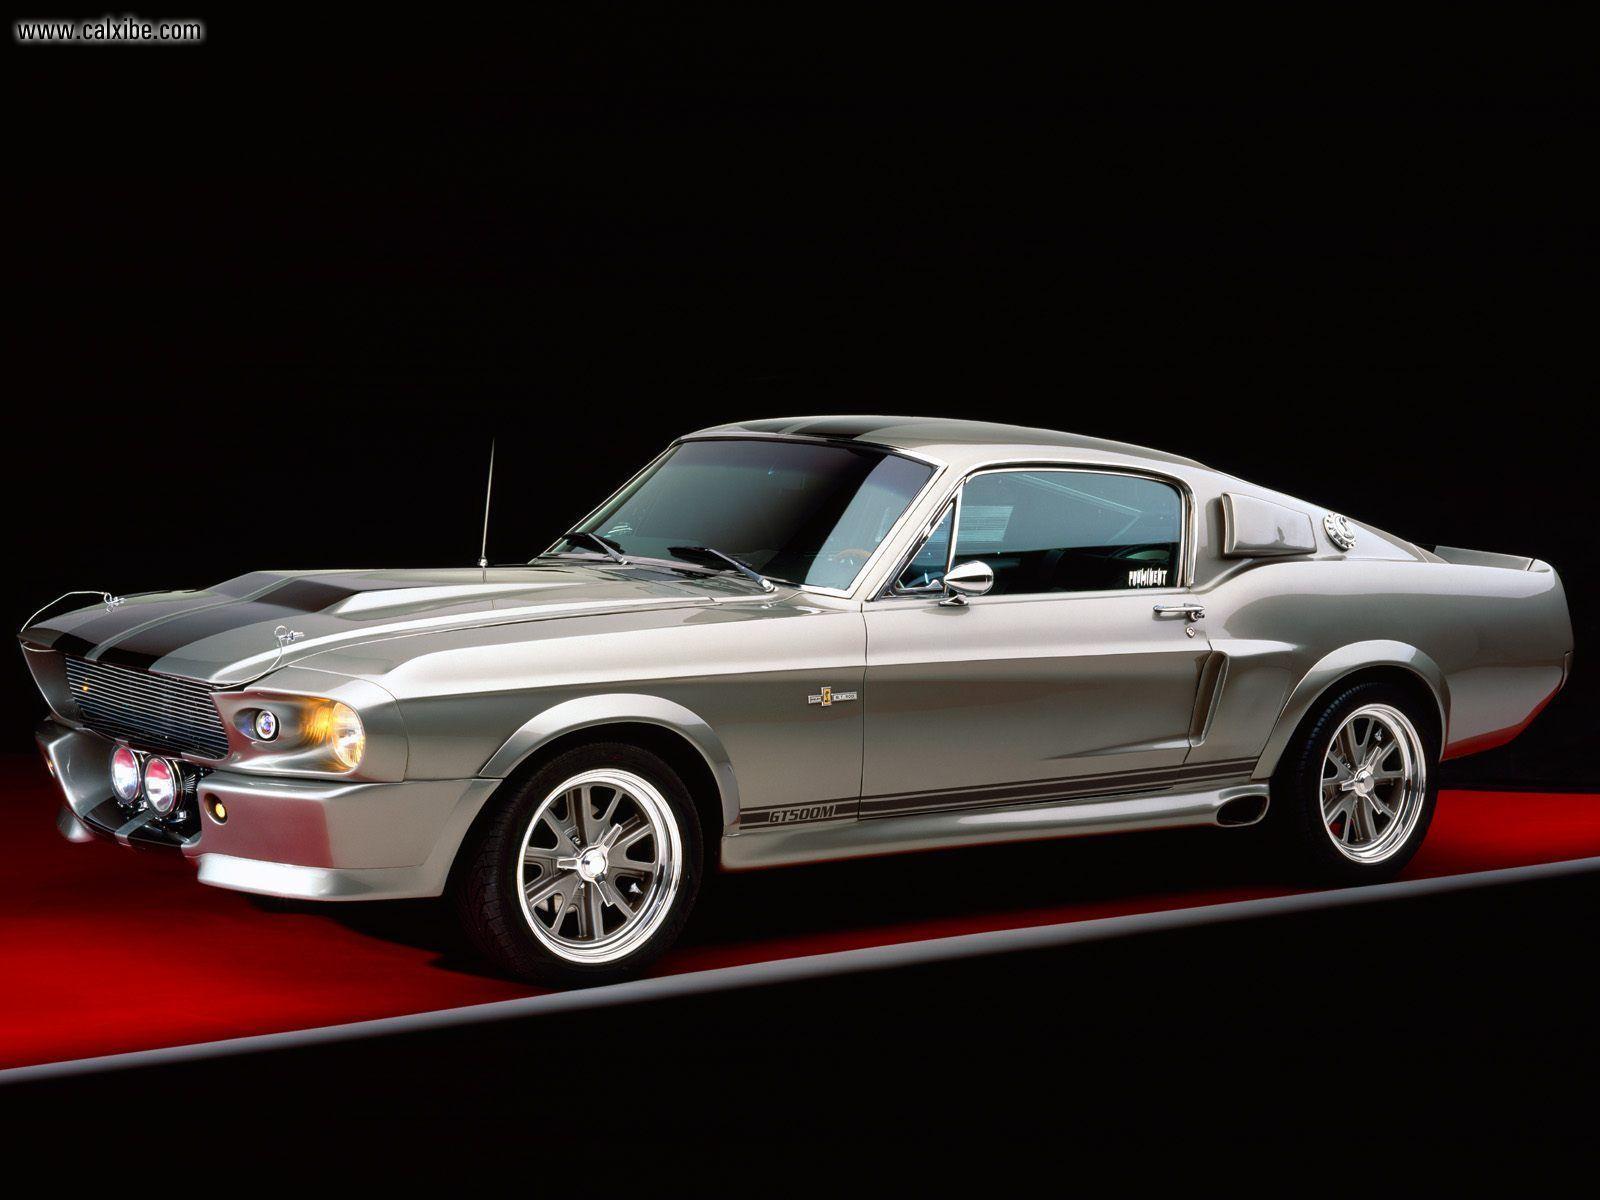 image For > Ford Mustang 1967 Shelby Gt500 Wallpaper